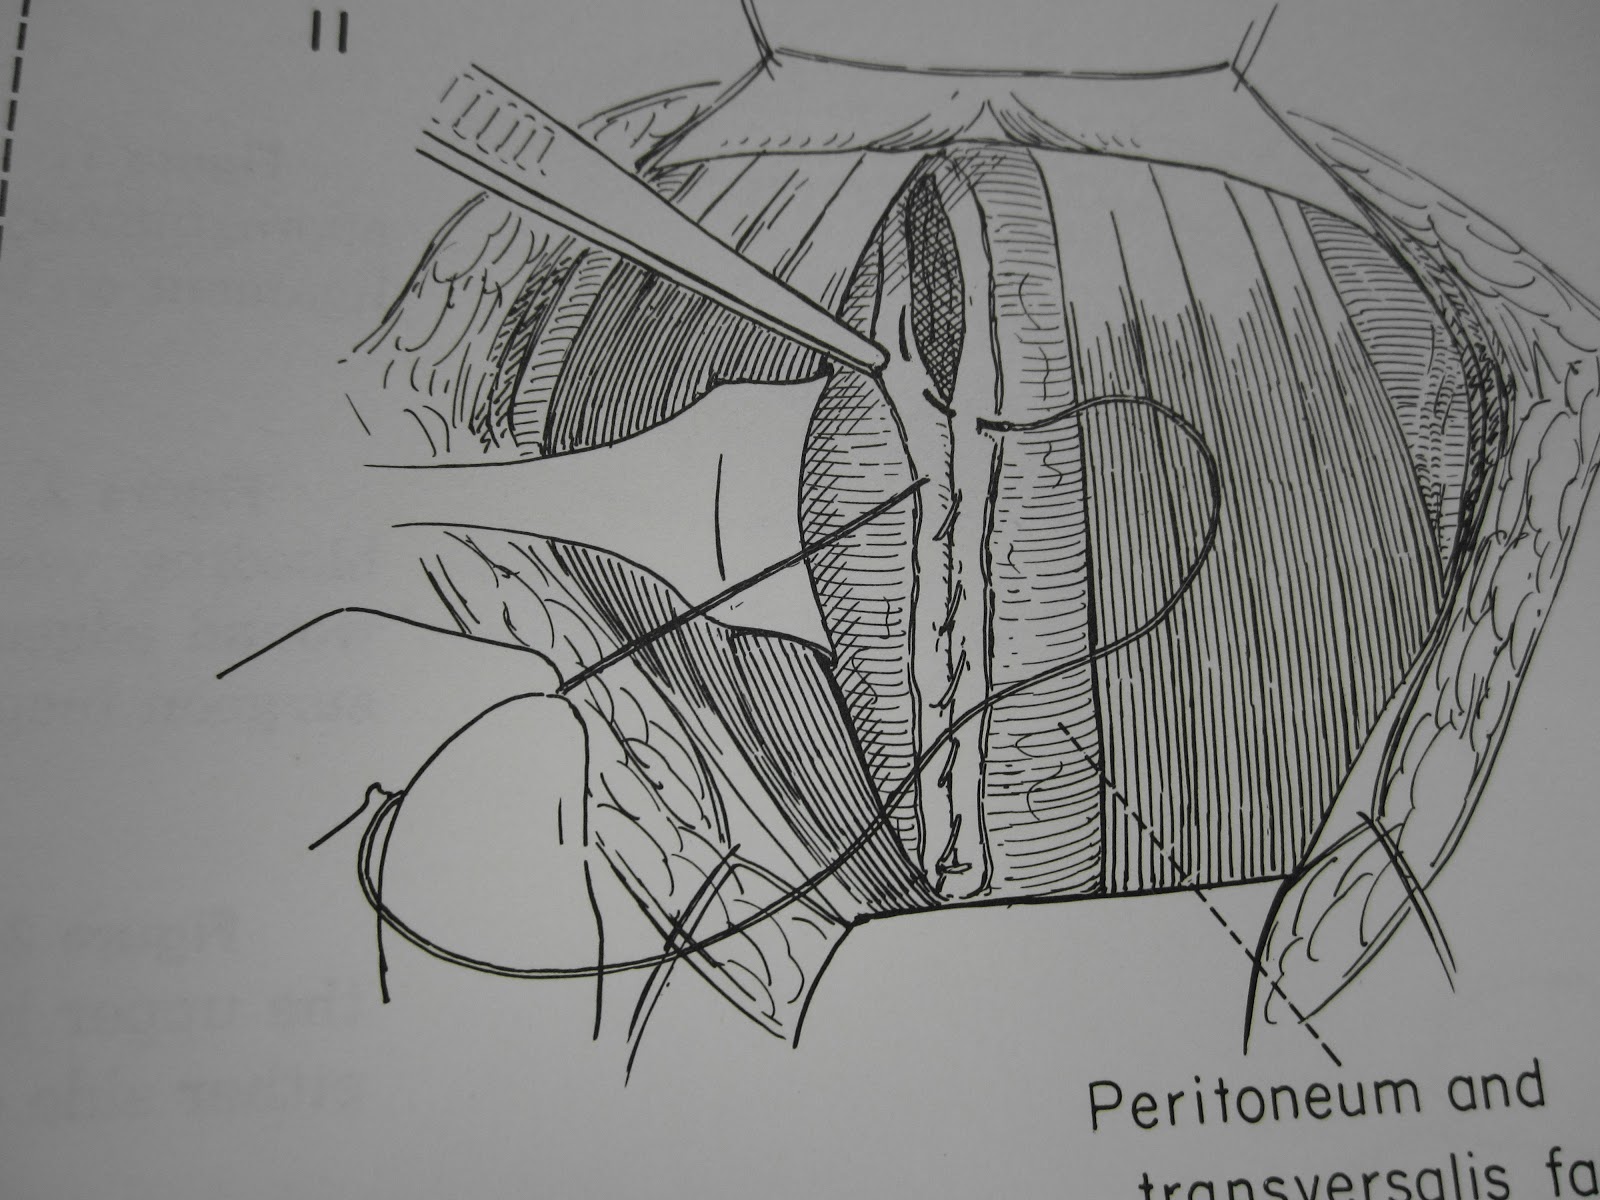 The Pfannenstiel Incision Opening And Closing The Tummy